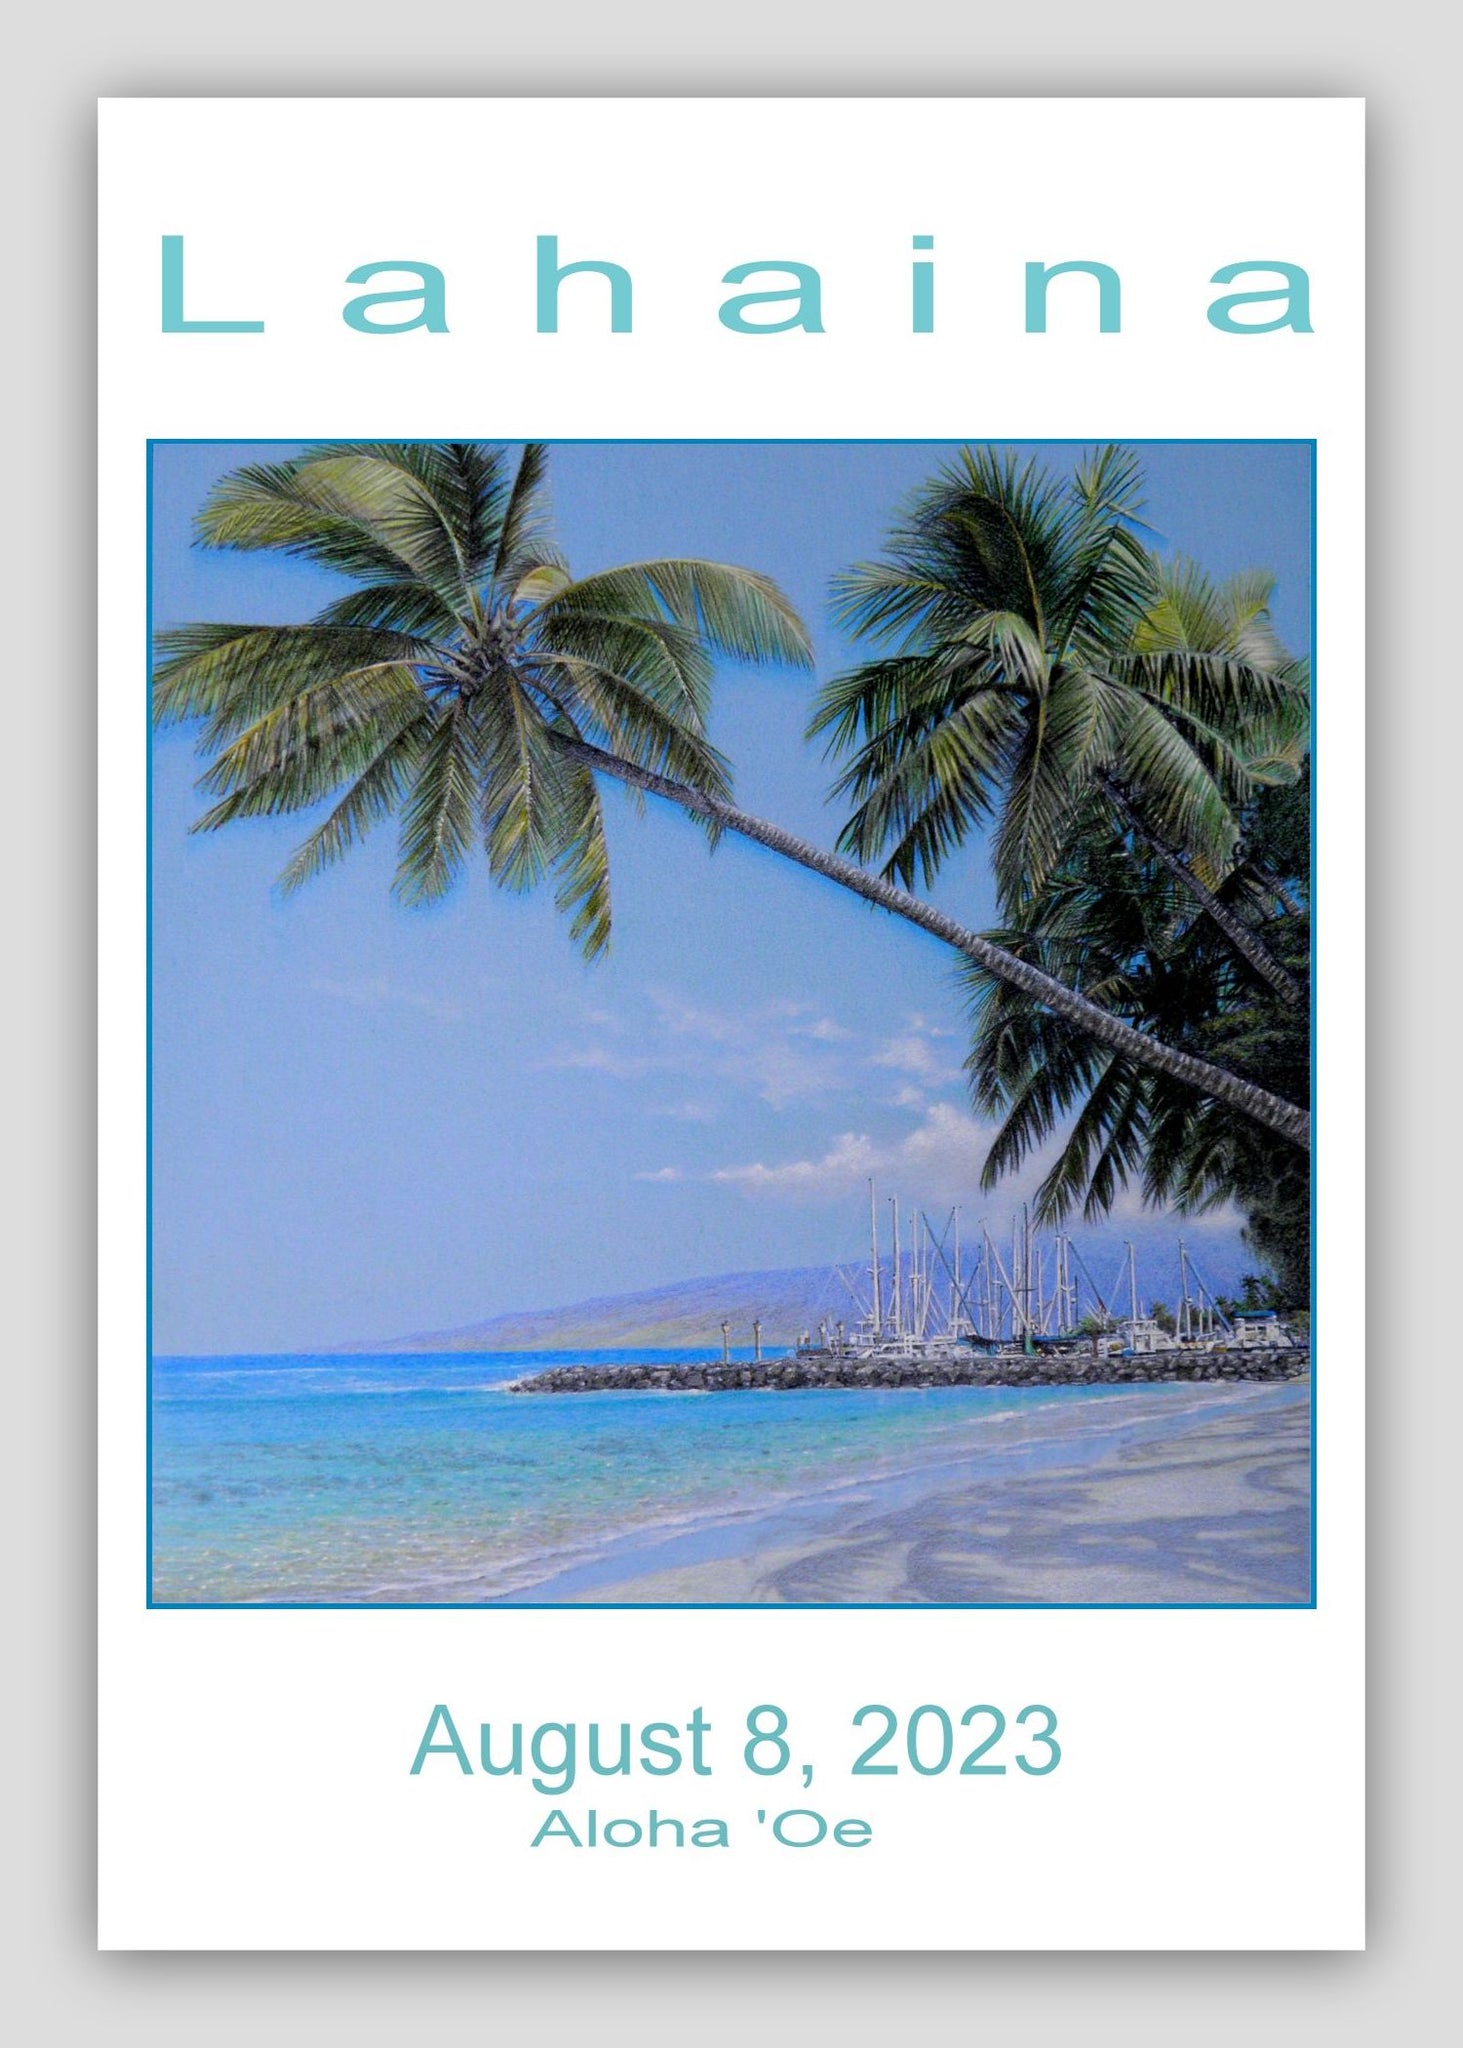 The Lahaina Commemorative Collection